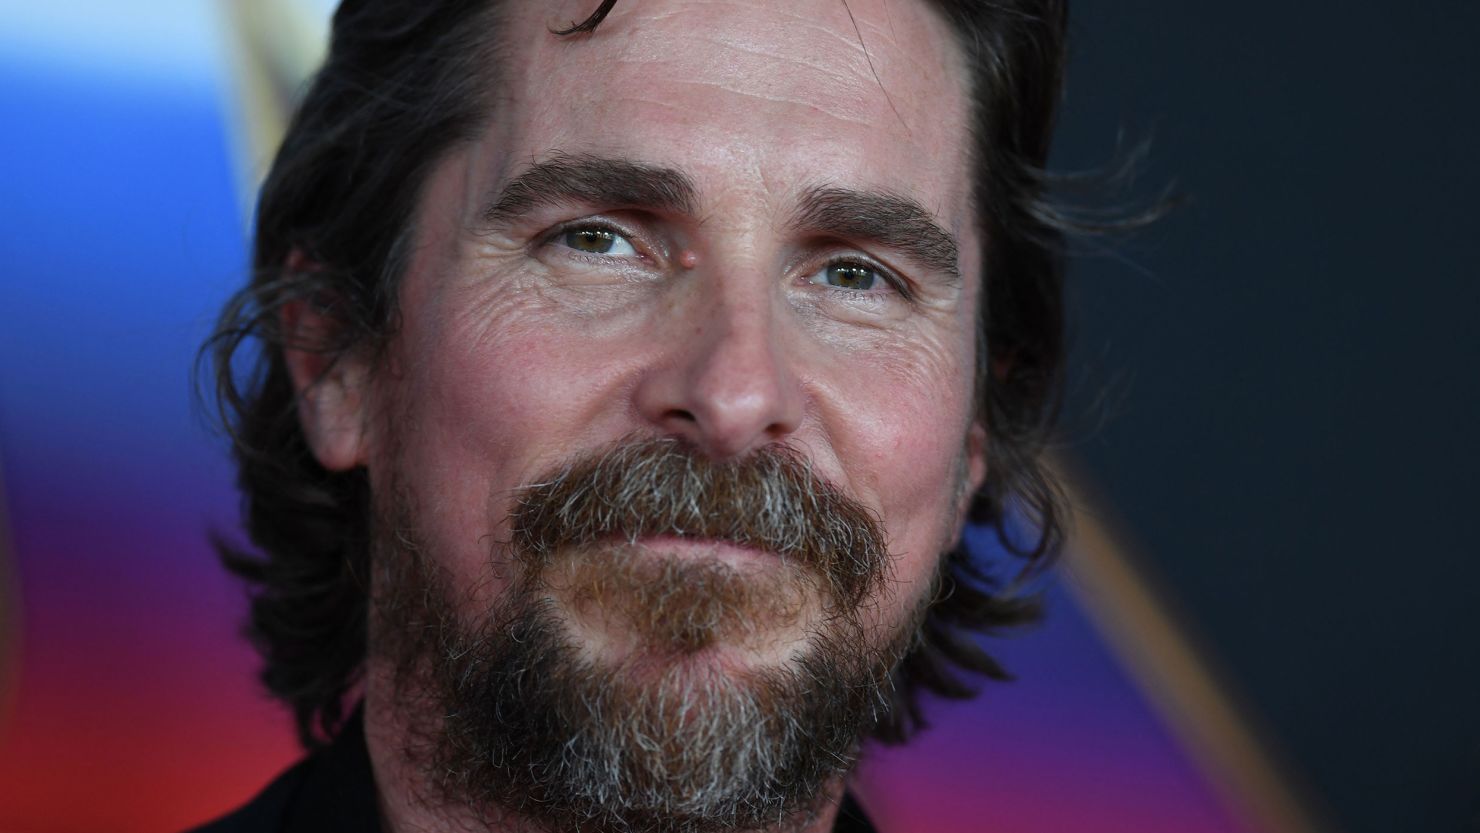 Actor Christian Bale, seen here arriving for Marvel Studios "Thor: Love And Thunder" world premiere at the El Capitan theatre in Los Angeles on June 23, 2022, has opened up about the doubts some people had about his approach to Batman. 